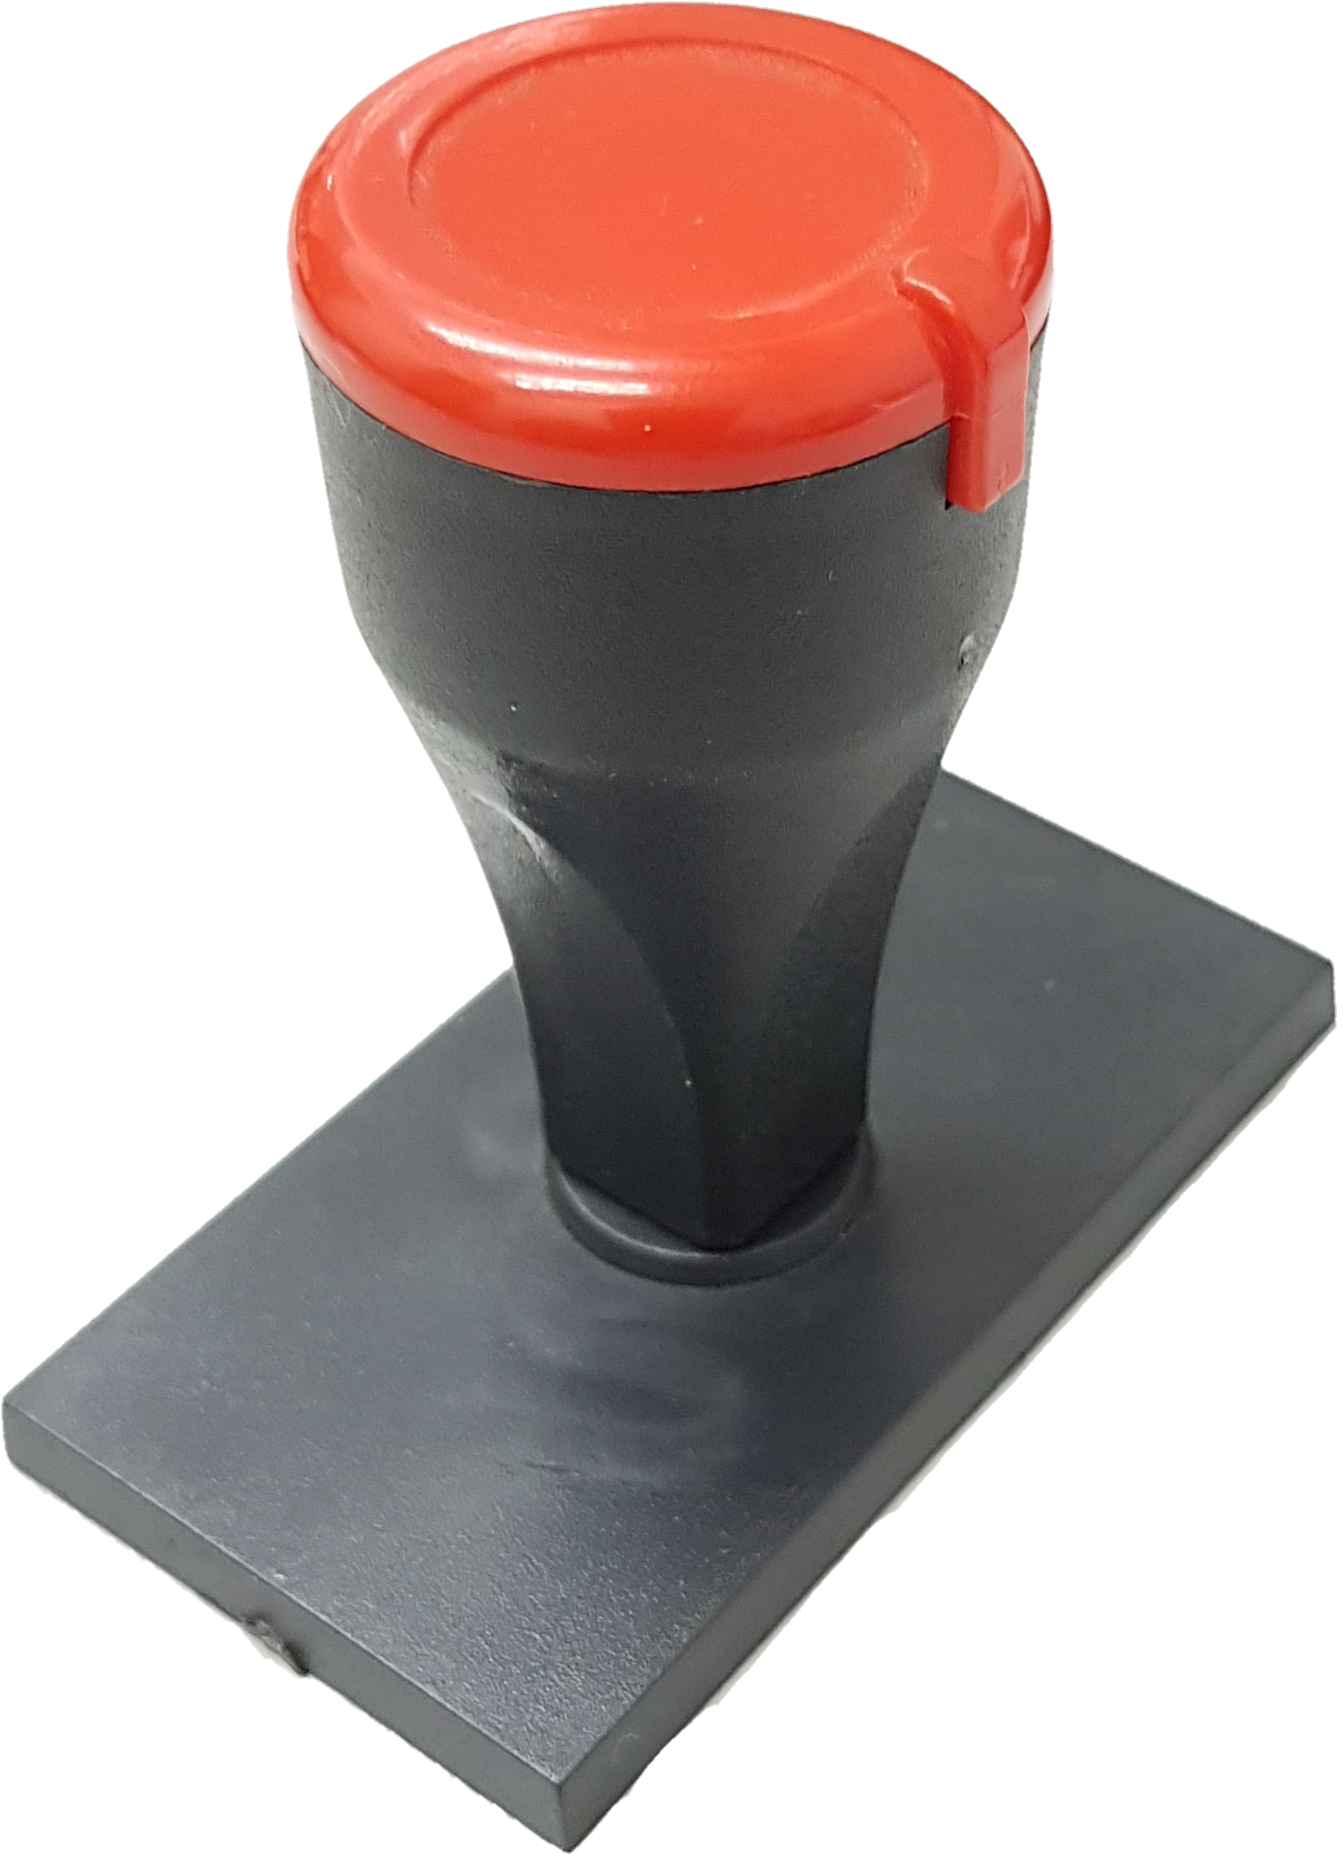 A Black And Red Stamp